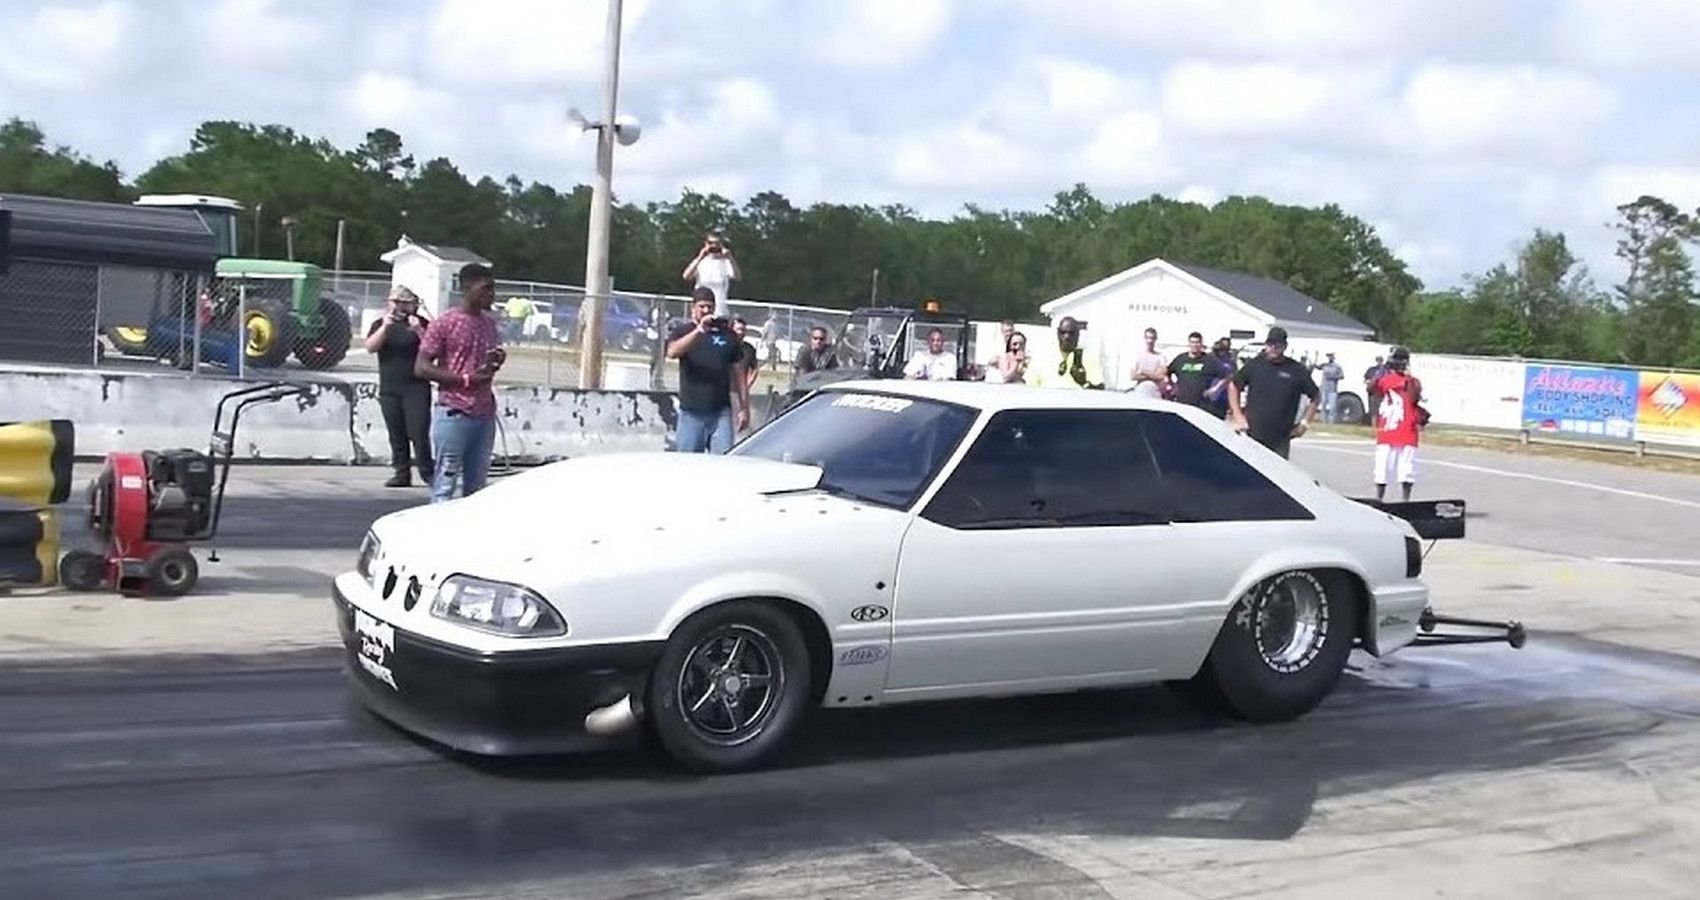 These Are The Sickest Cars Ever Featured On Street Outlaws